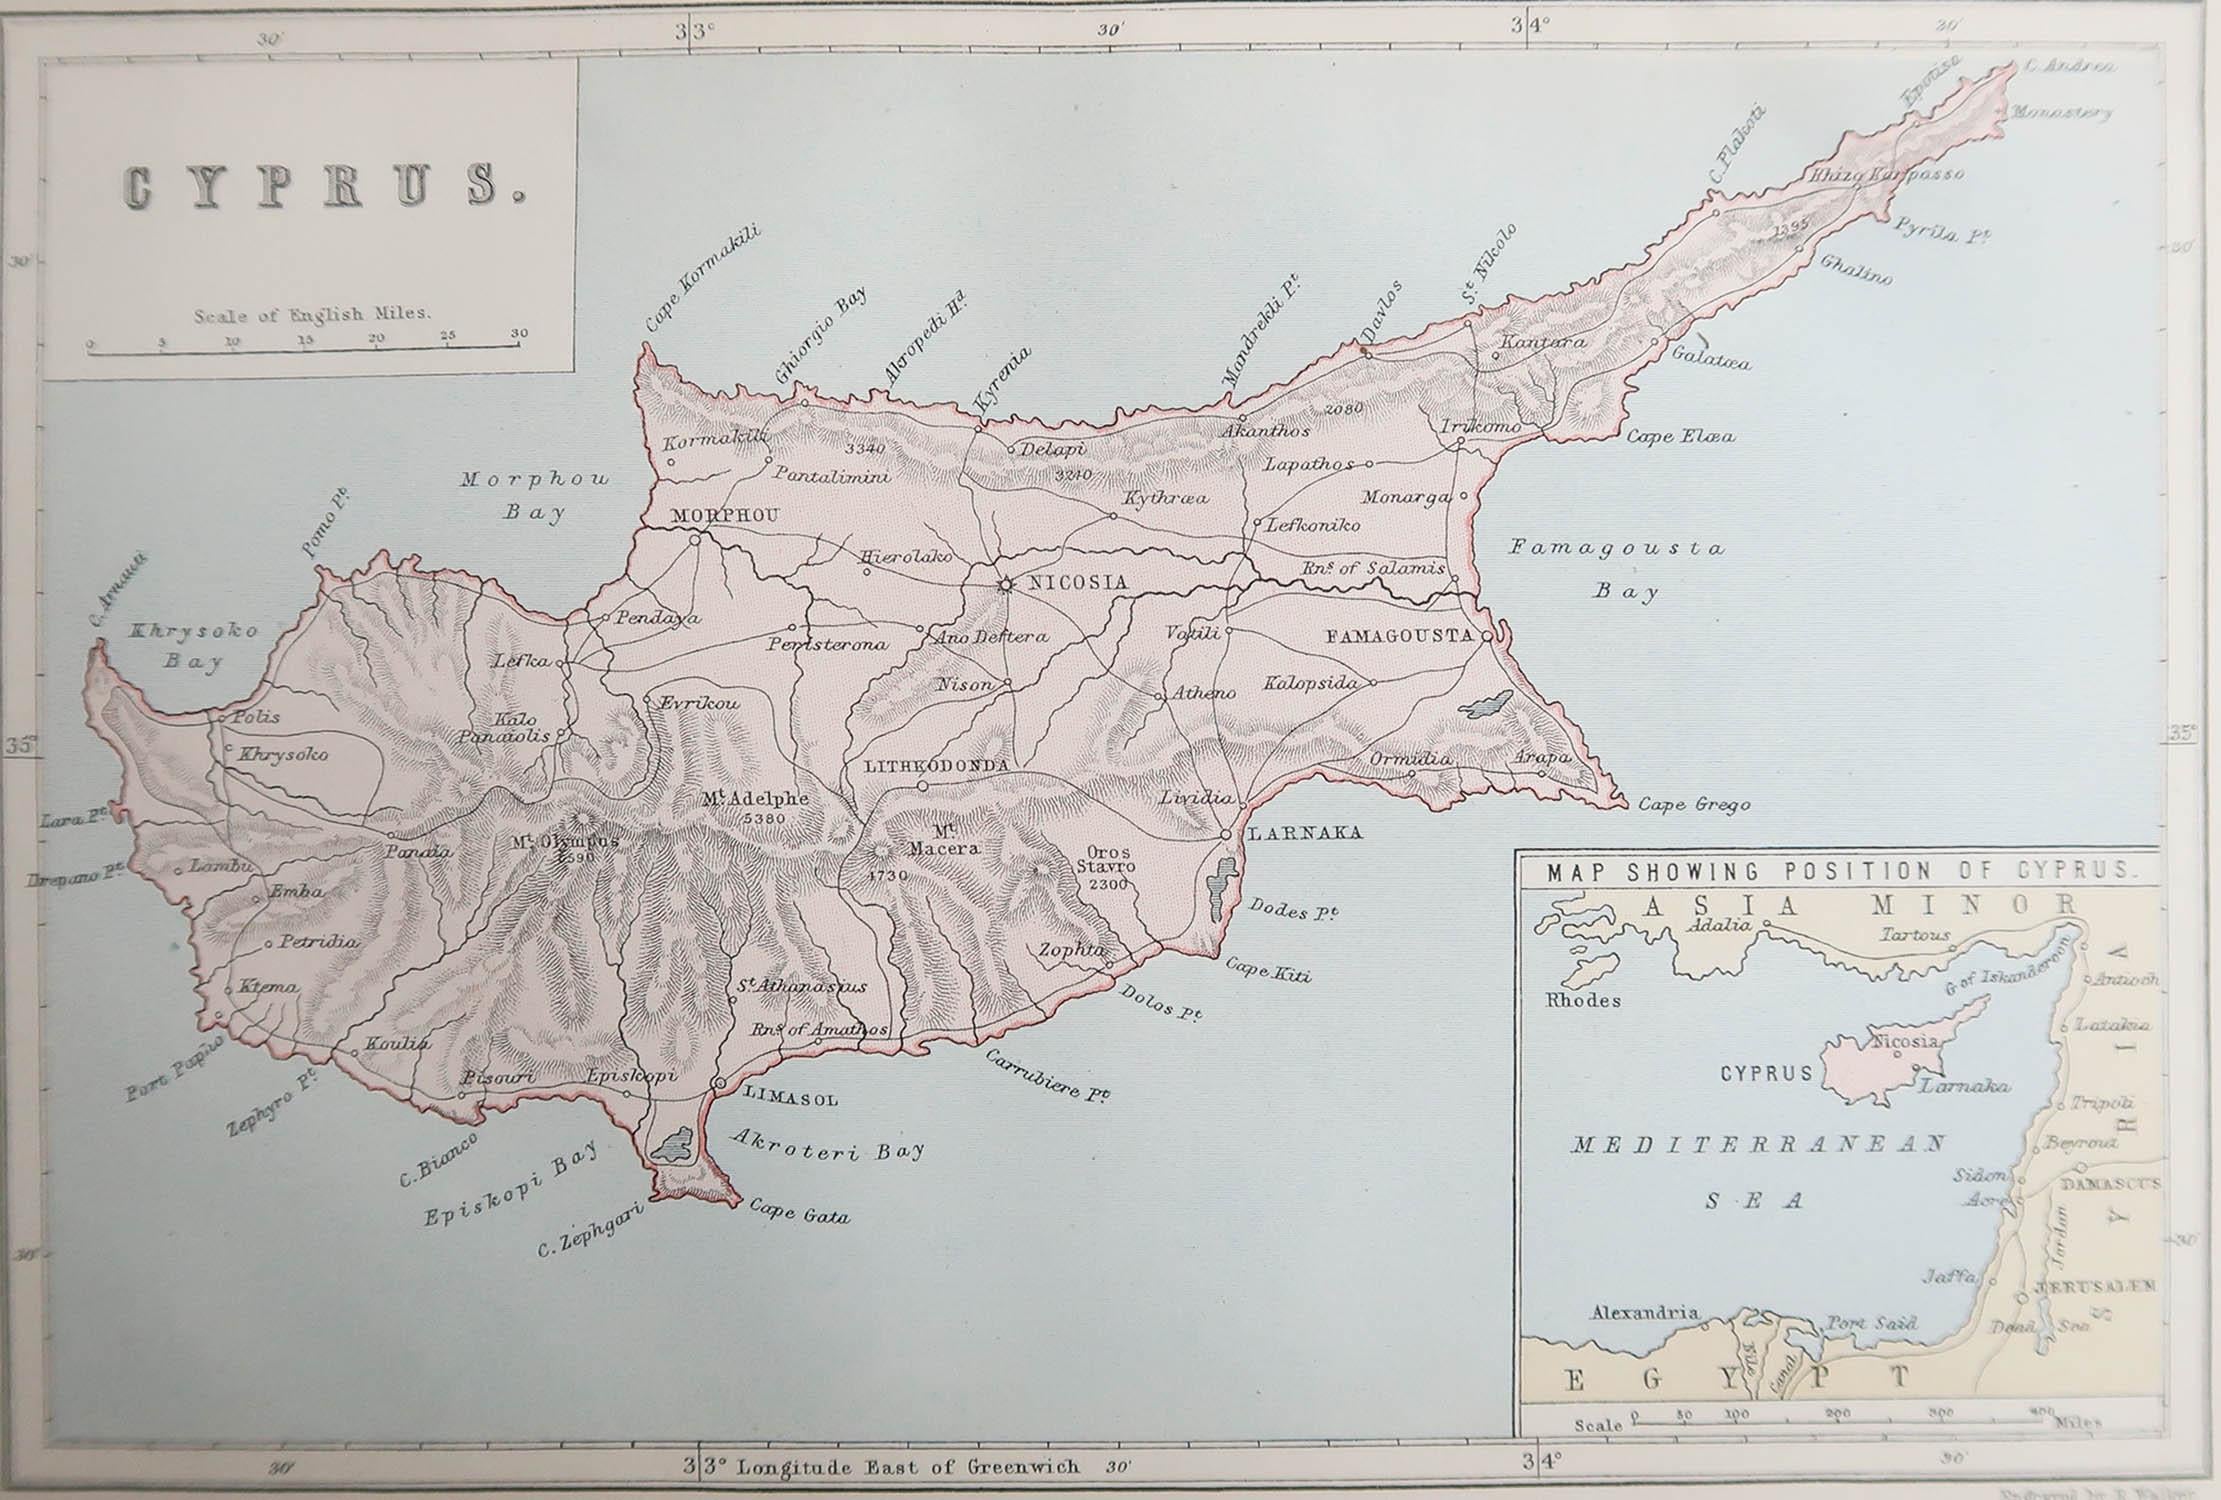 Great map of Cyprus

Drawn and Engraved by R.Walker

Published W.Mackenzie, London

Original colour

Unframed.








